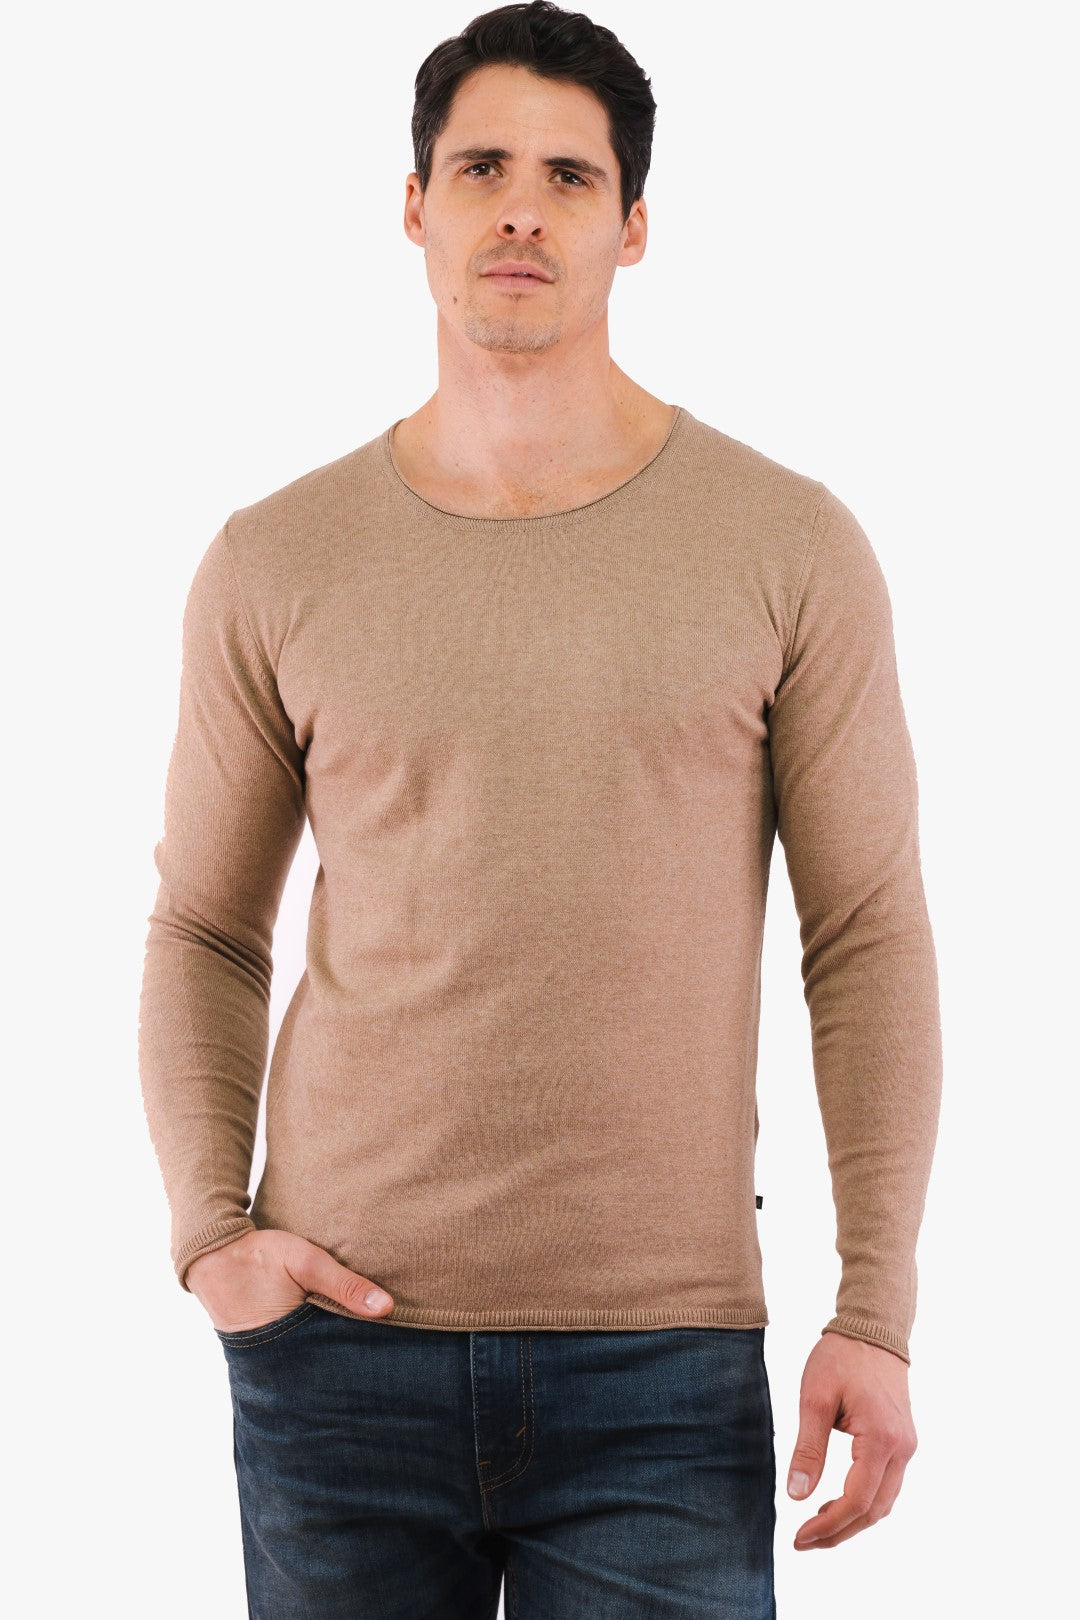 Matinique Sweater in Caramel color